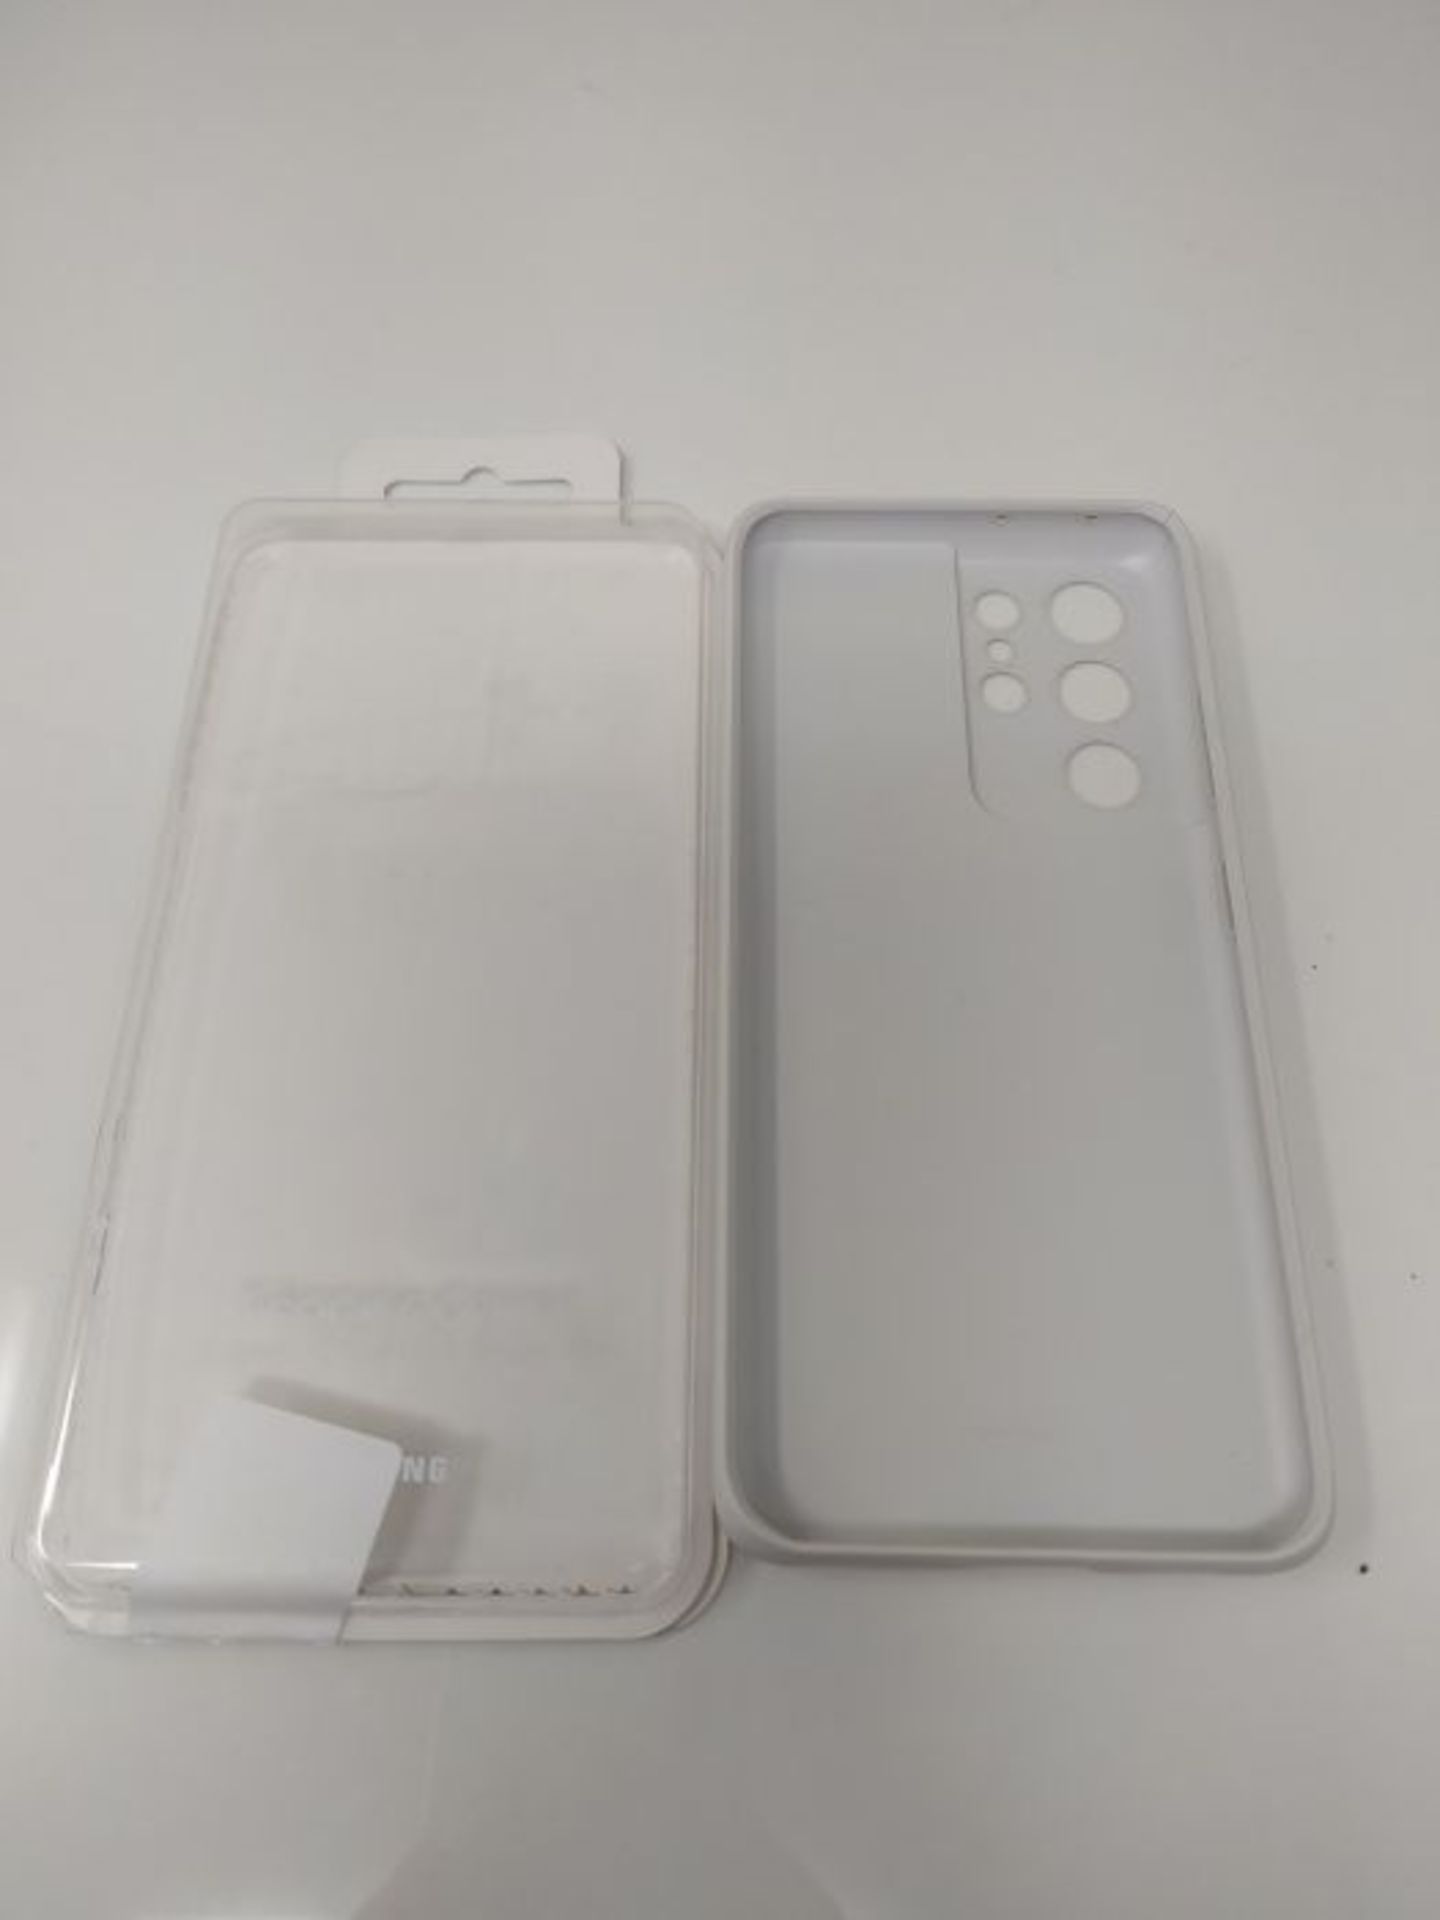 Samsung Galaxy S21 Ultra 5G Silicone Cover Light Gray - 6.8 inches - Image 2 of 2